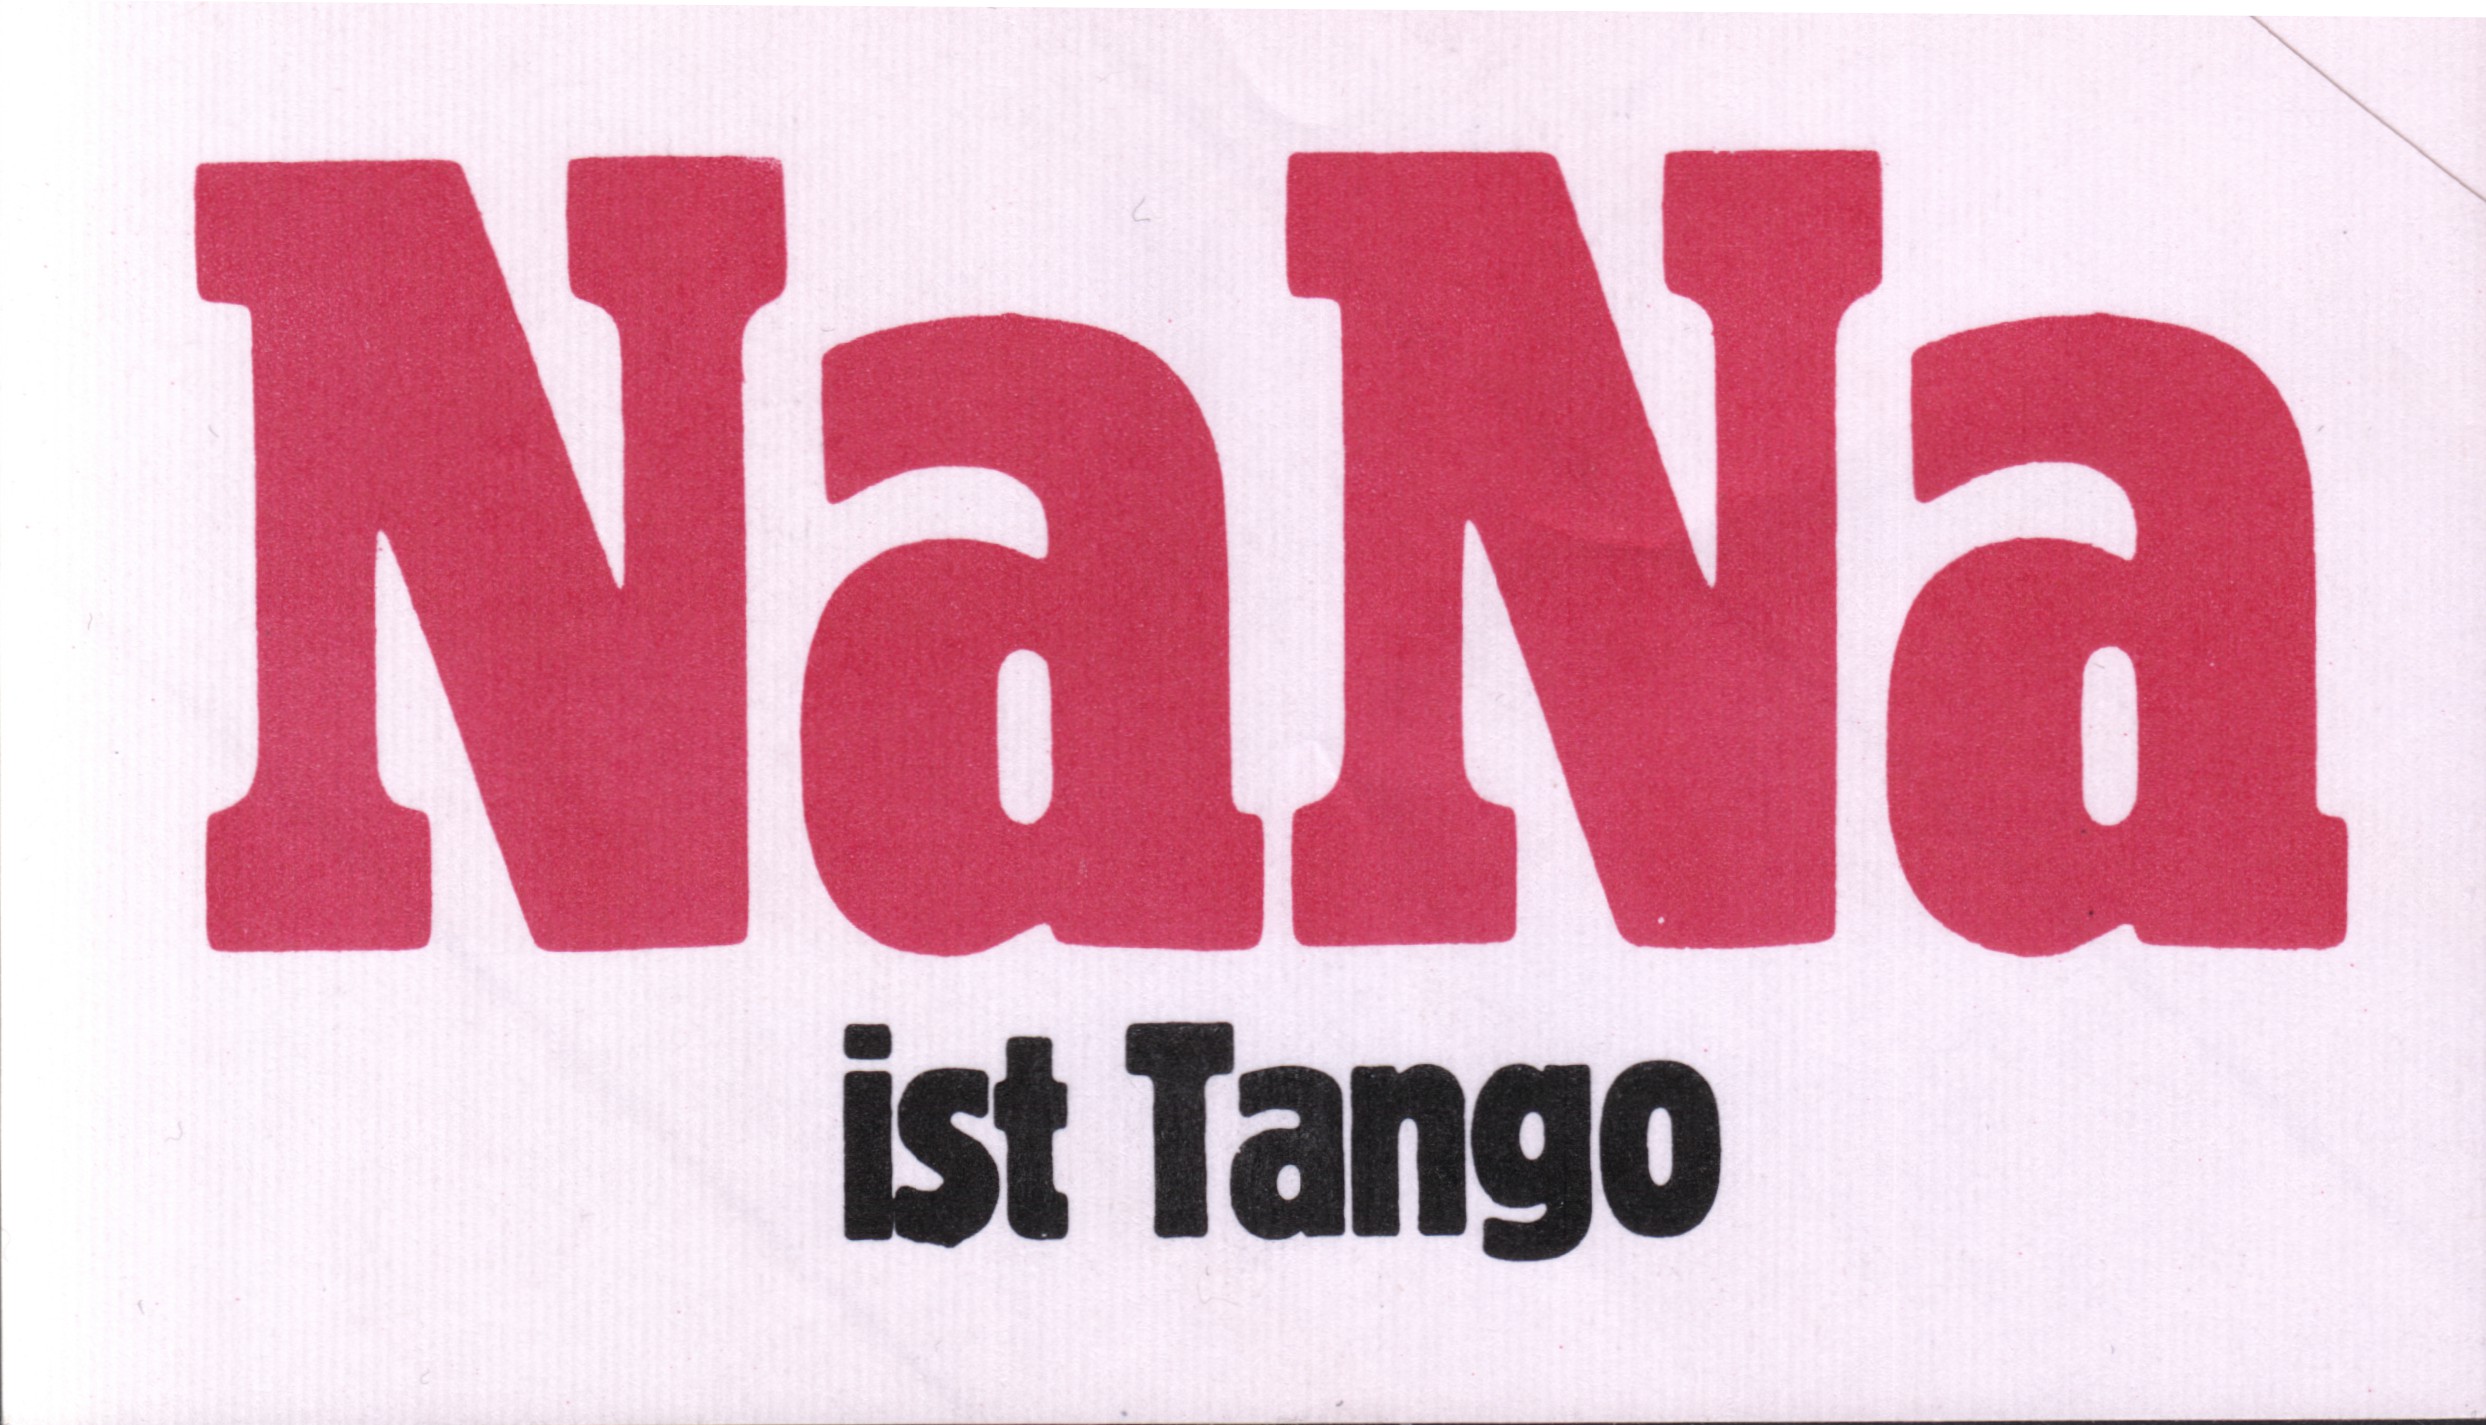 red type on white background for manda ist tango